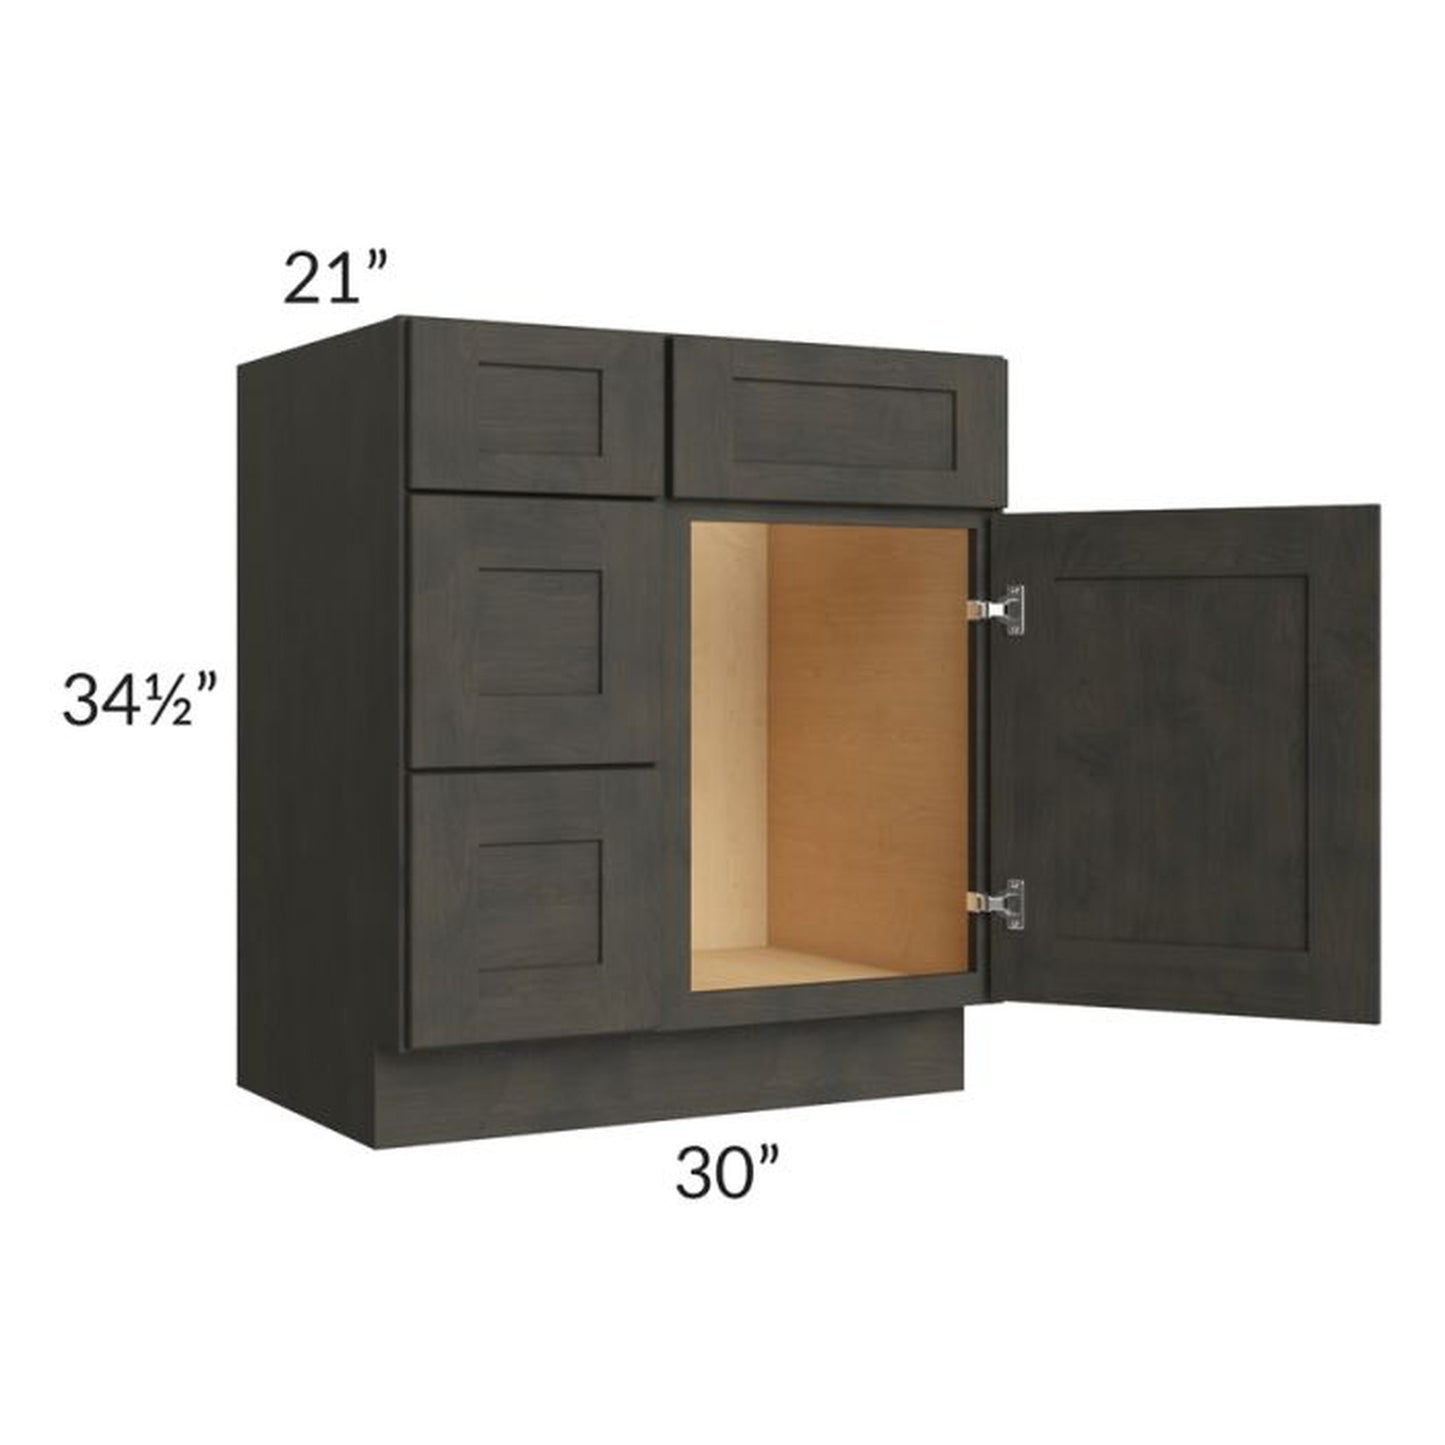 RTA Charcoal Grey Shaker 30" Vanity Base Cabinet (Drawers on Left) with 2 Decorative End Panels